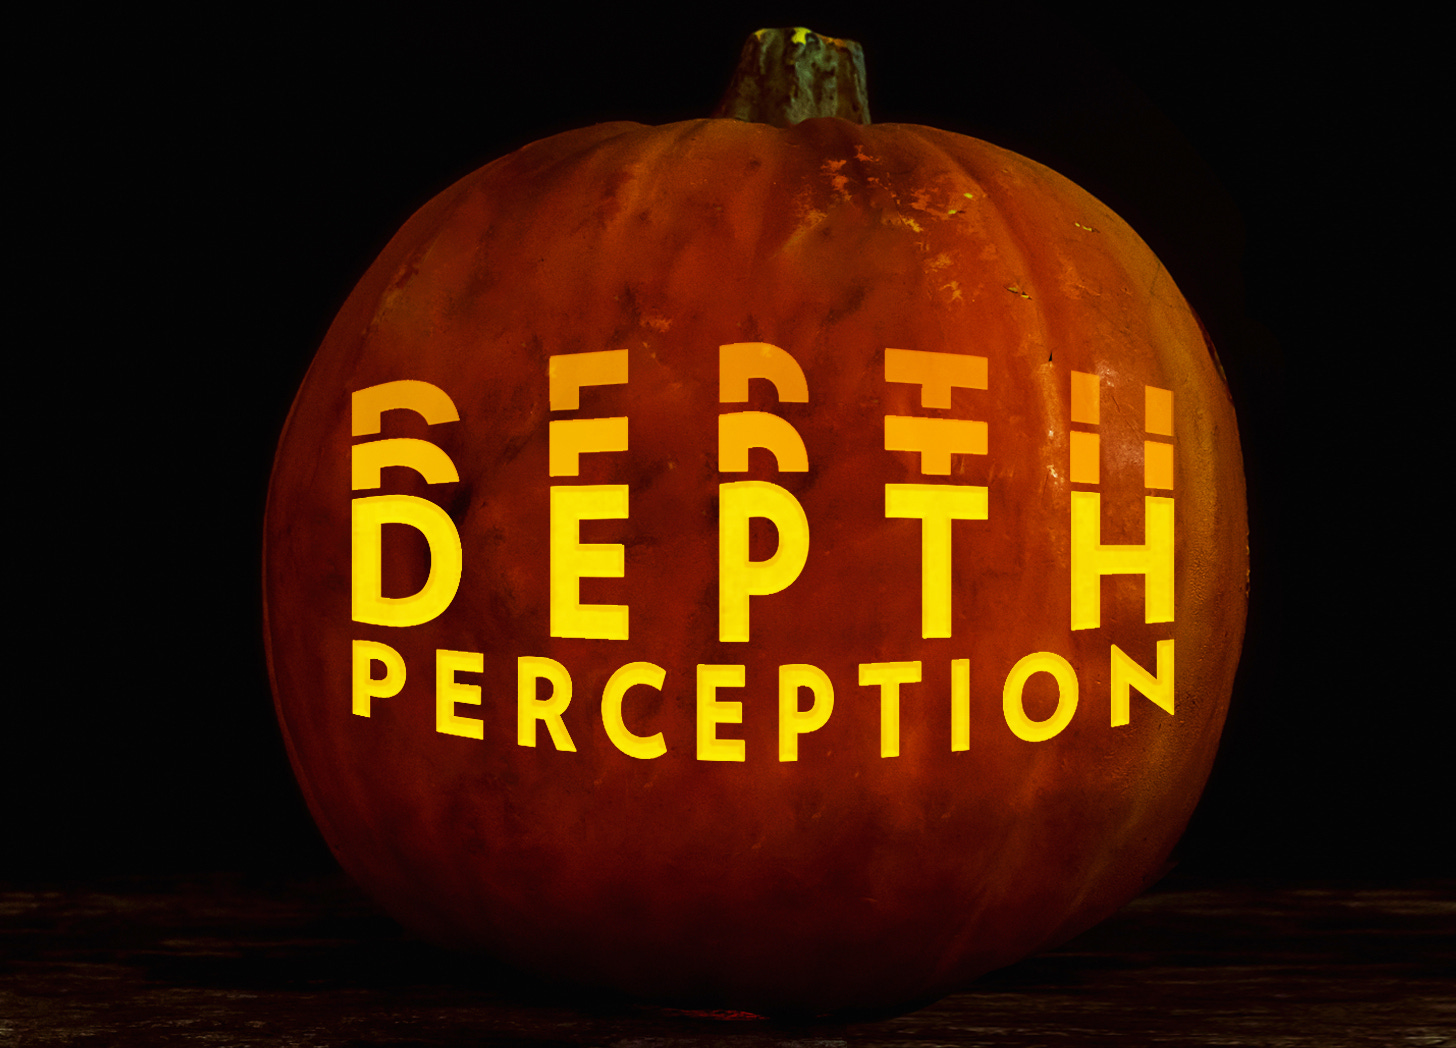 A photo illustration of a pumpkin on a black background with a glowing orange "DEPTH PERCEPTION" logo carved in it.